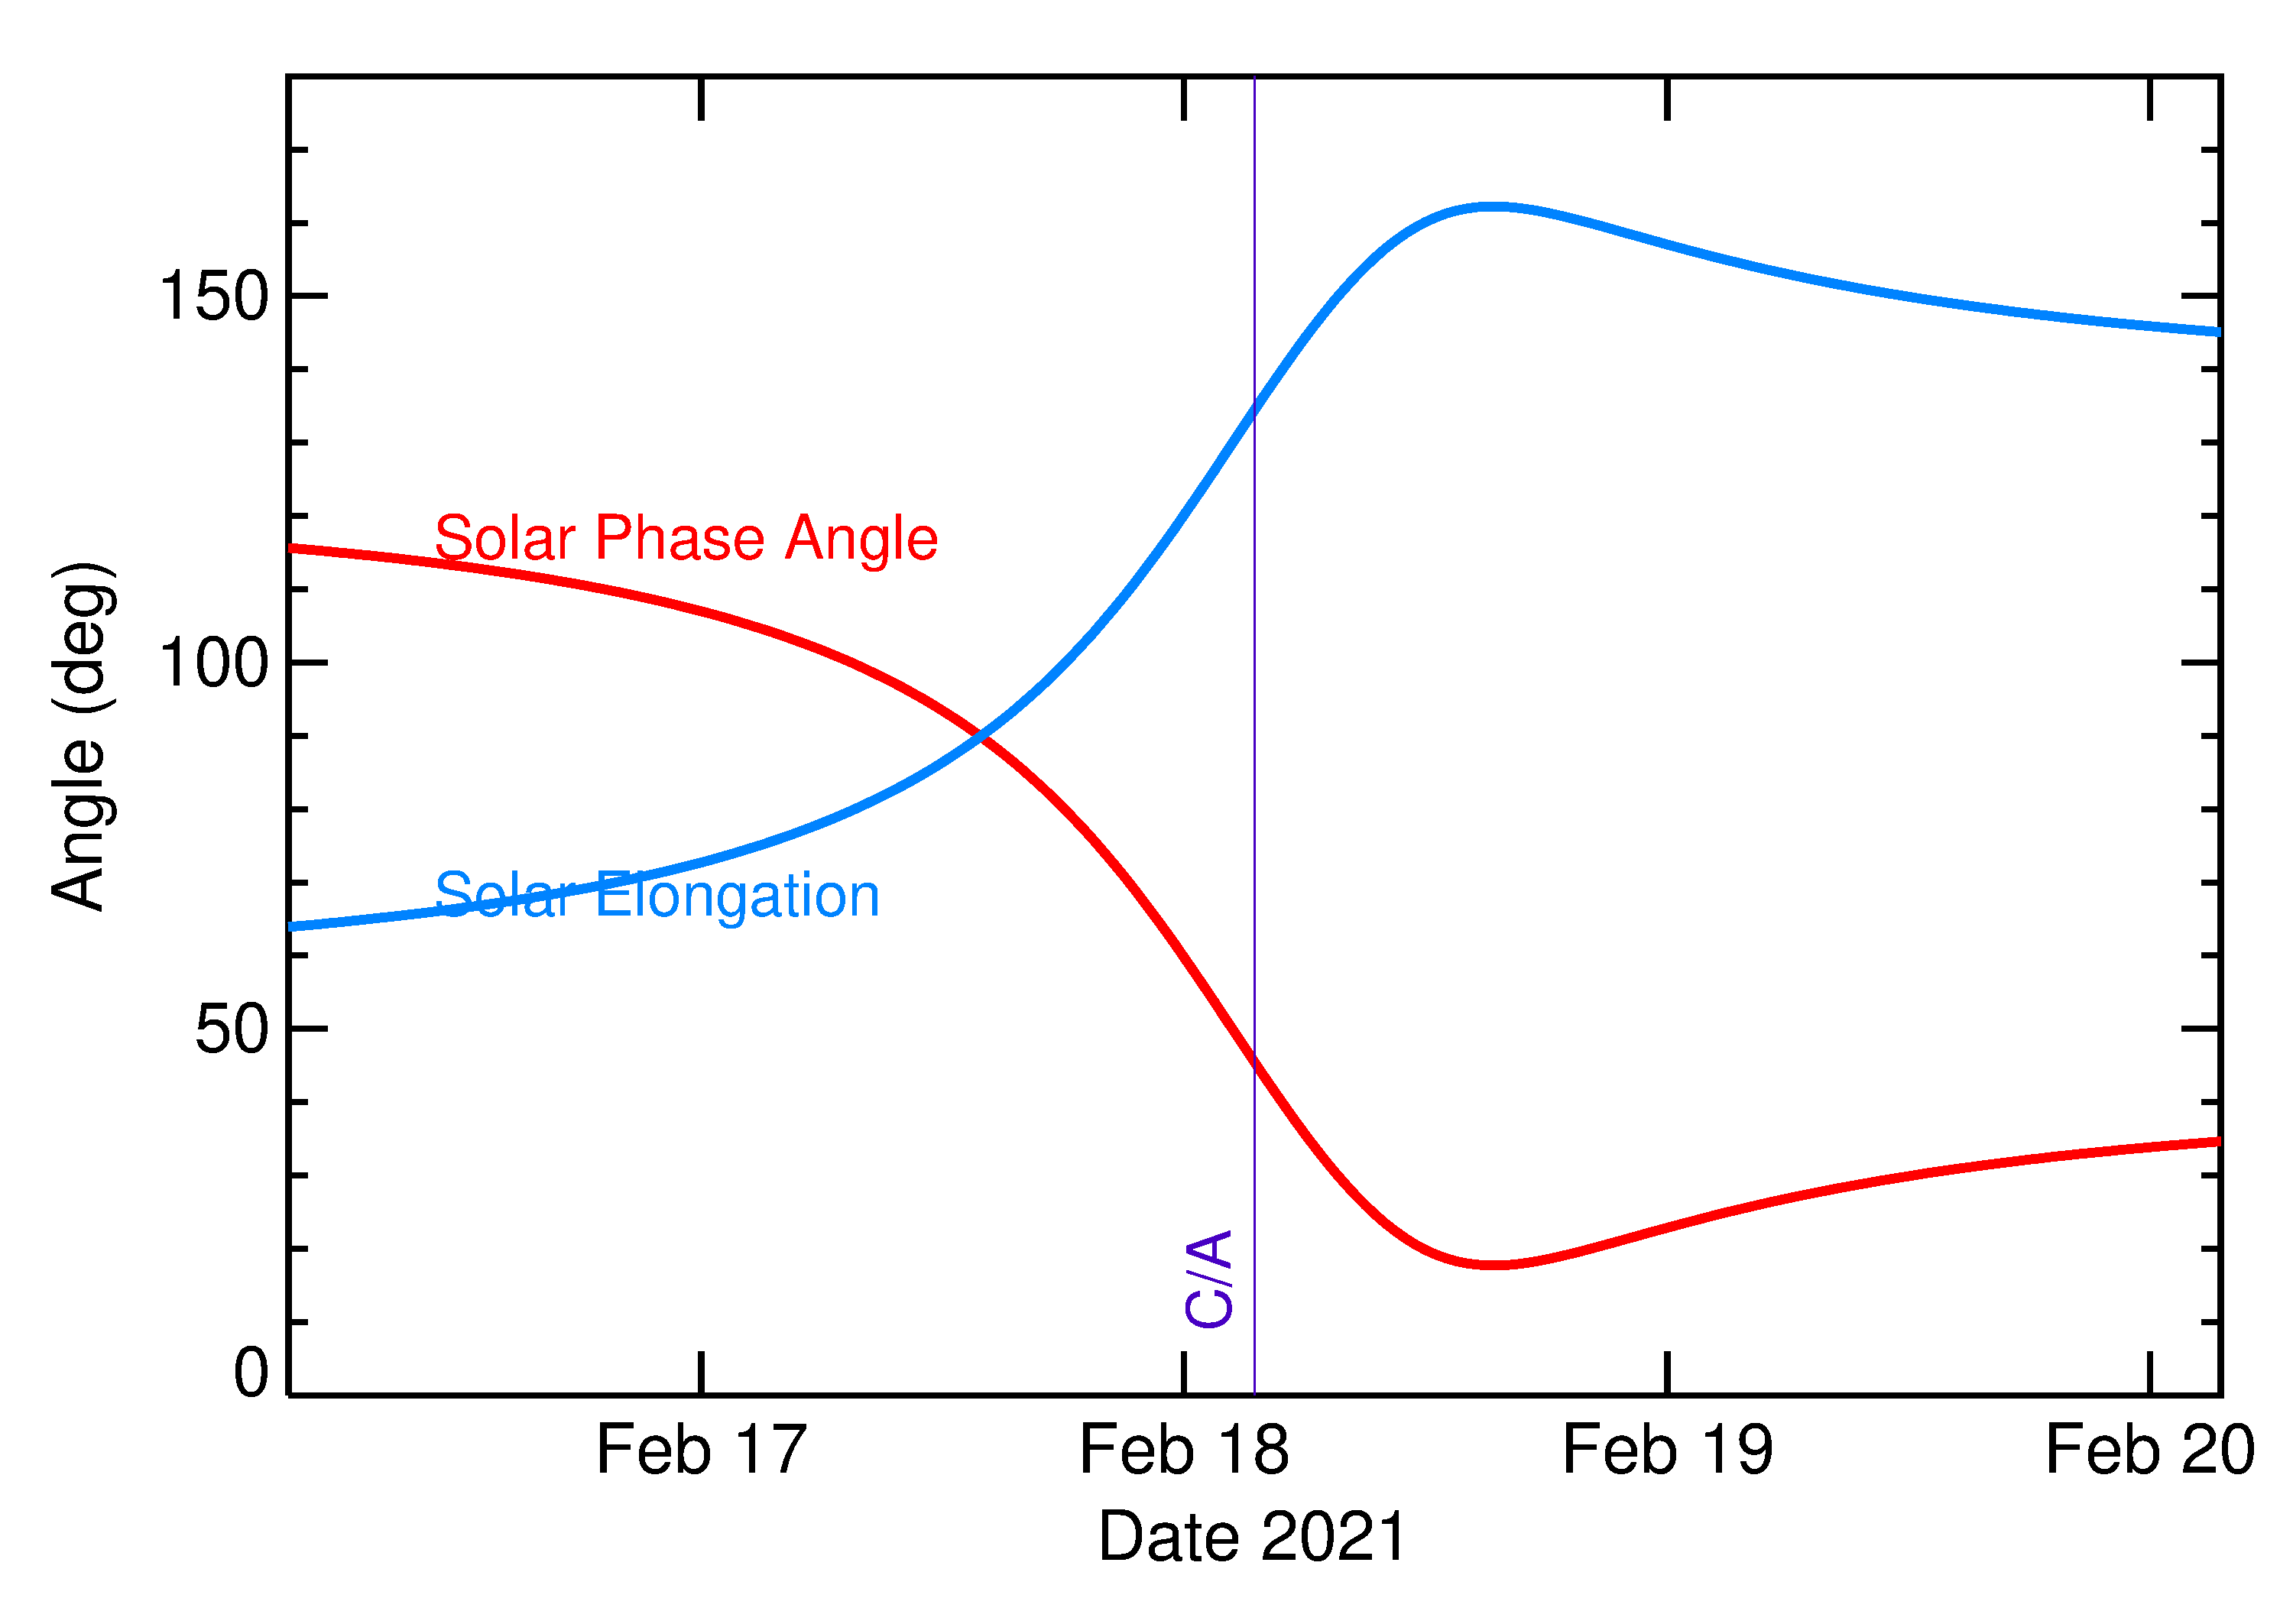 Solar Elongation and Solar Phase Angle of 2021 DN1 in the days around closest approach